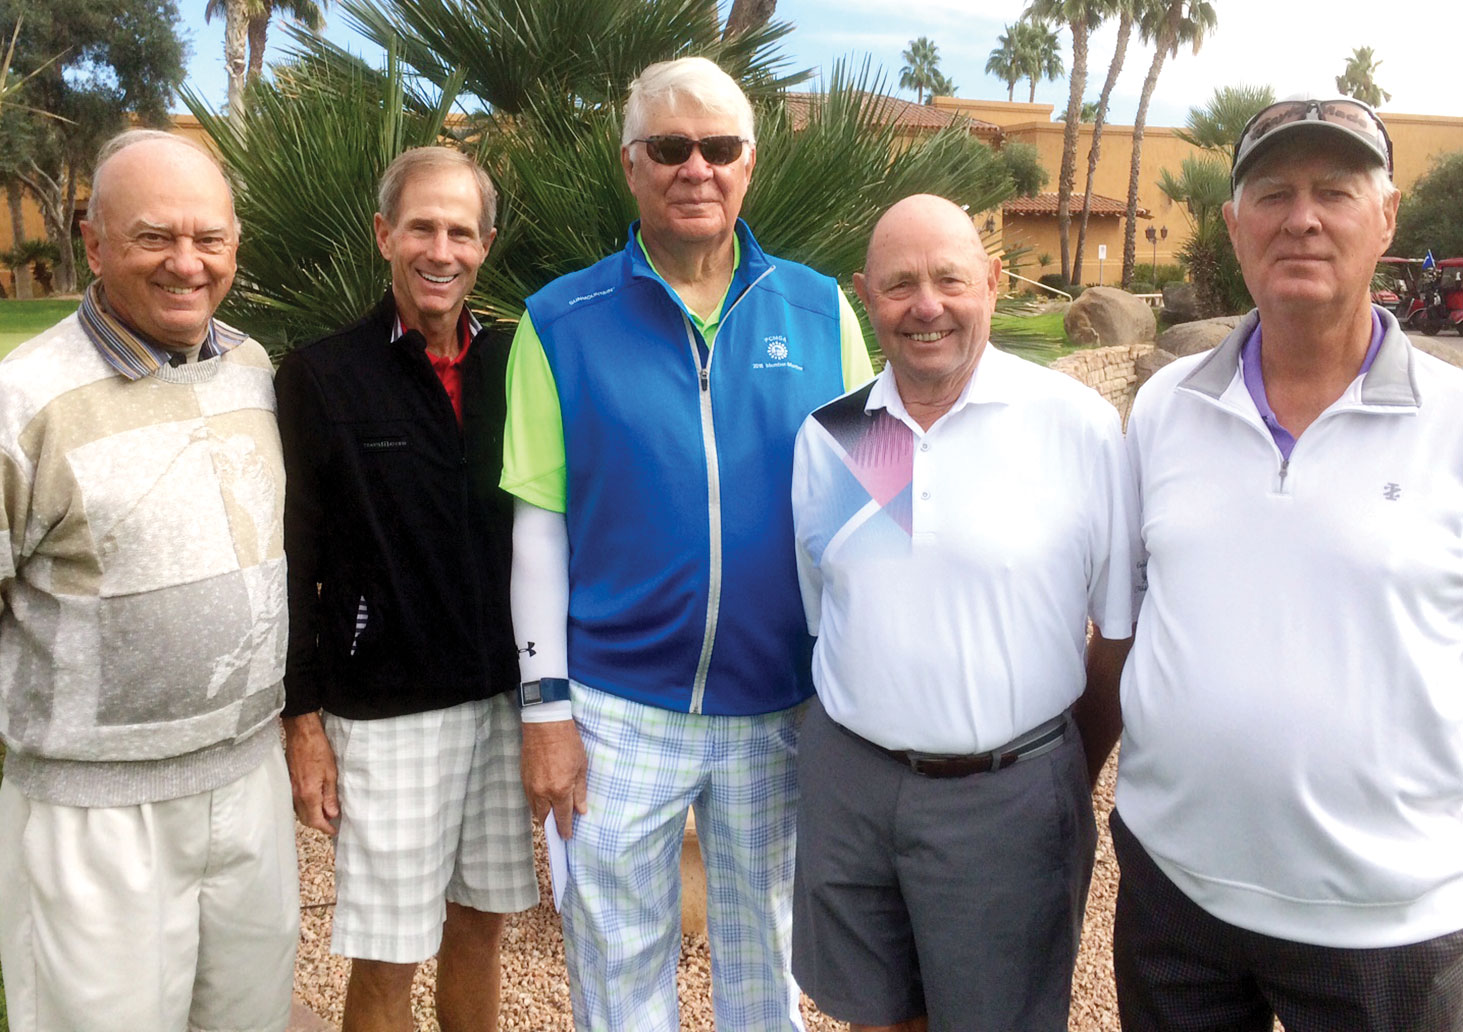 Hole-in-one winners, left to right: Jim Bundschuh, Jerry Davis, John Stergulz, Chuck “Gus” Gustafson and Jerry Monk